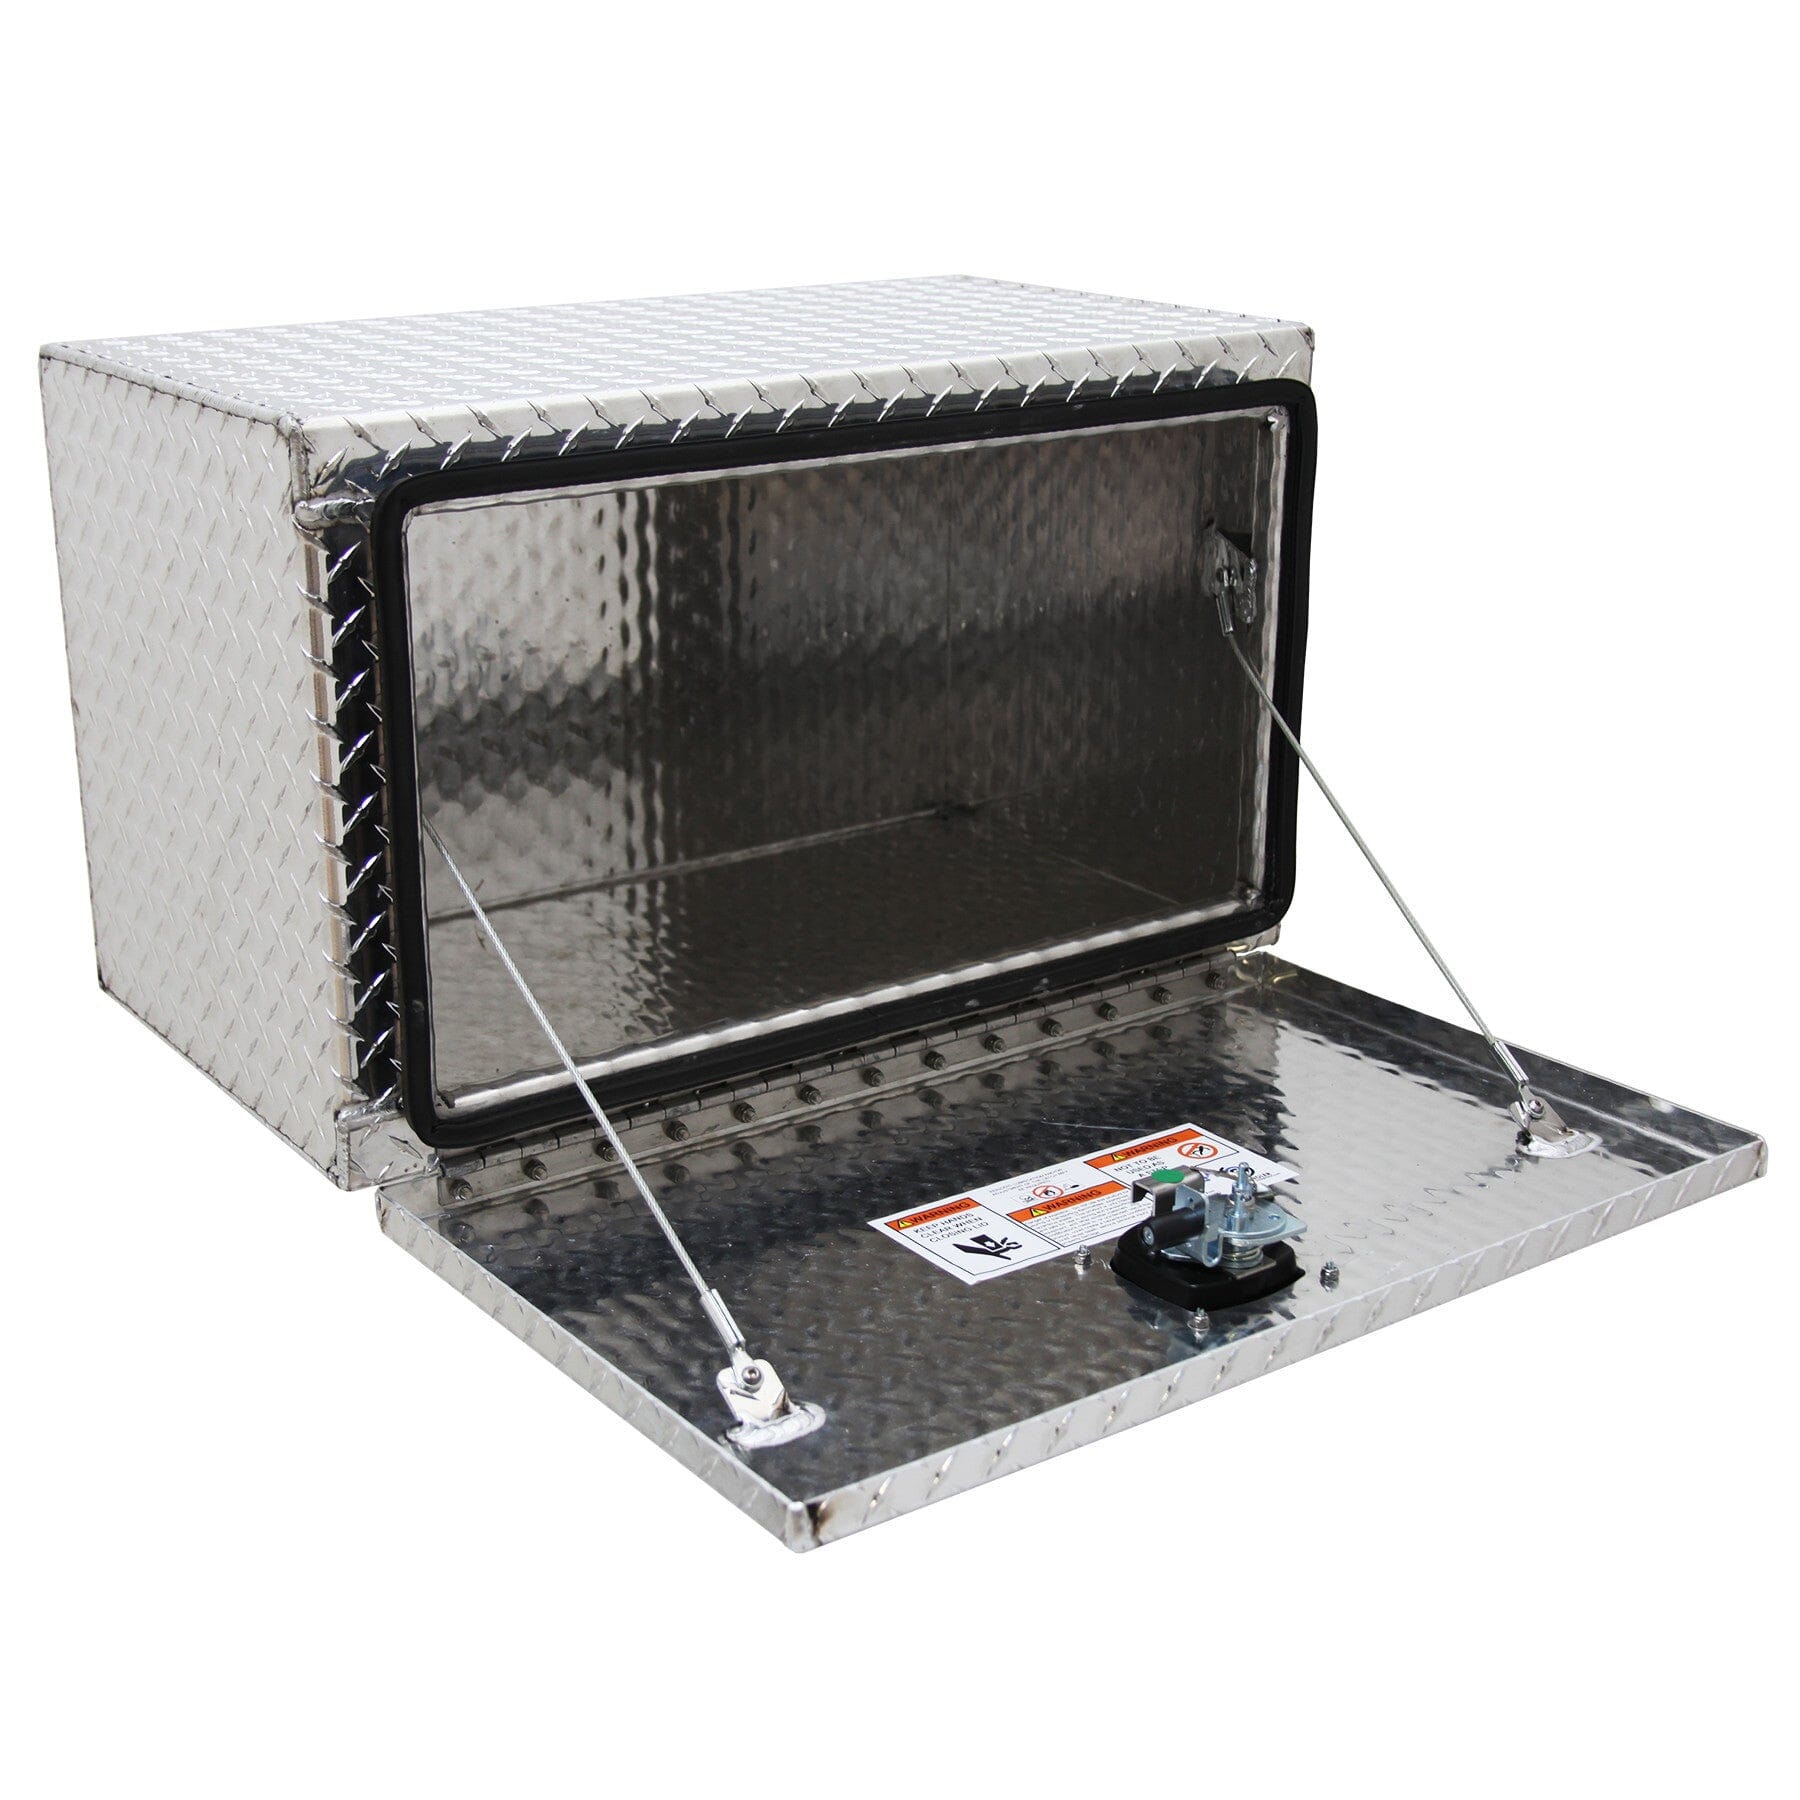 Image of Underbody Aluminum Tread Plate Flat Bed Toolbox | Chandler Truck Accessories